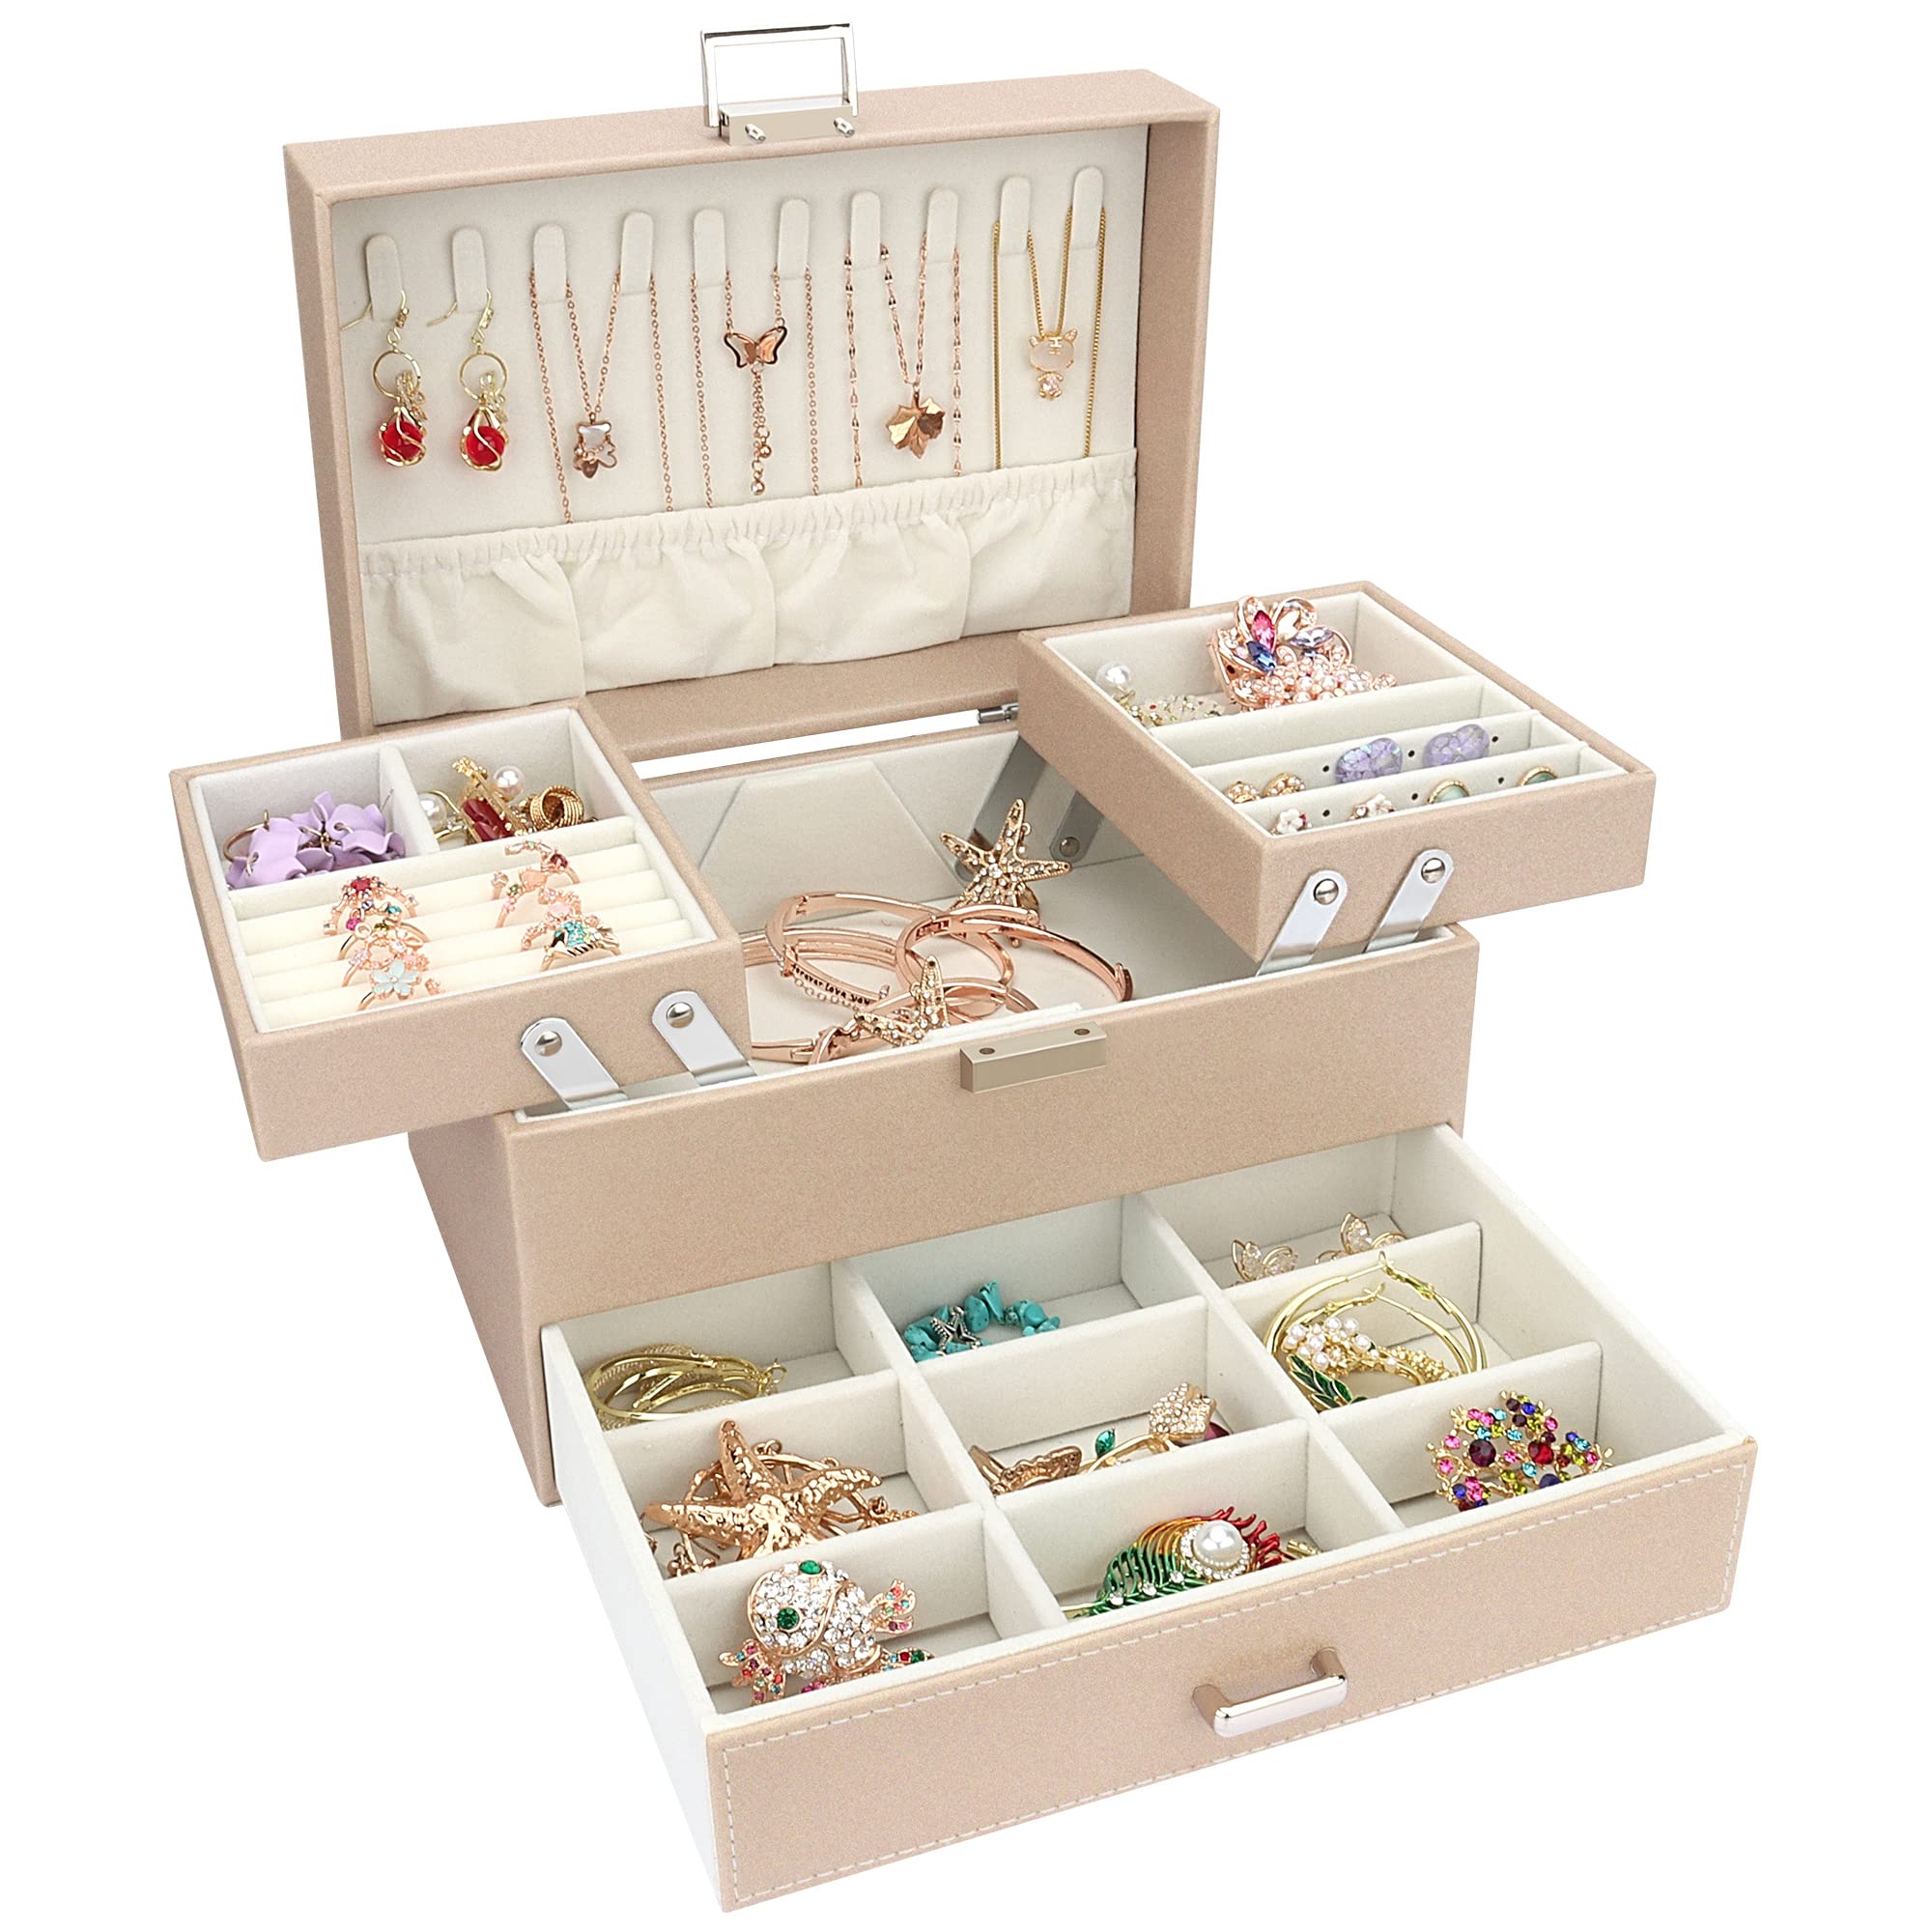 Jewellery Box Organiser, PU Leather Jewellery Case for women, Large Jewellery Organiser with Drawer, Jewellery Storage Case for Necklaces Earrings Bracelets and Rings,White